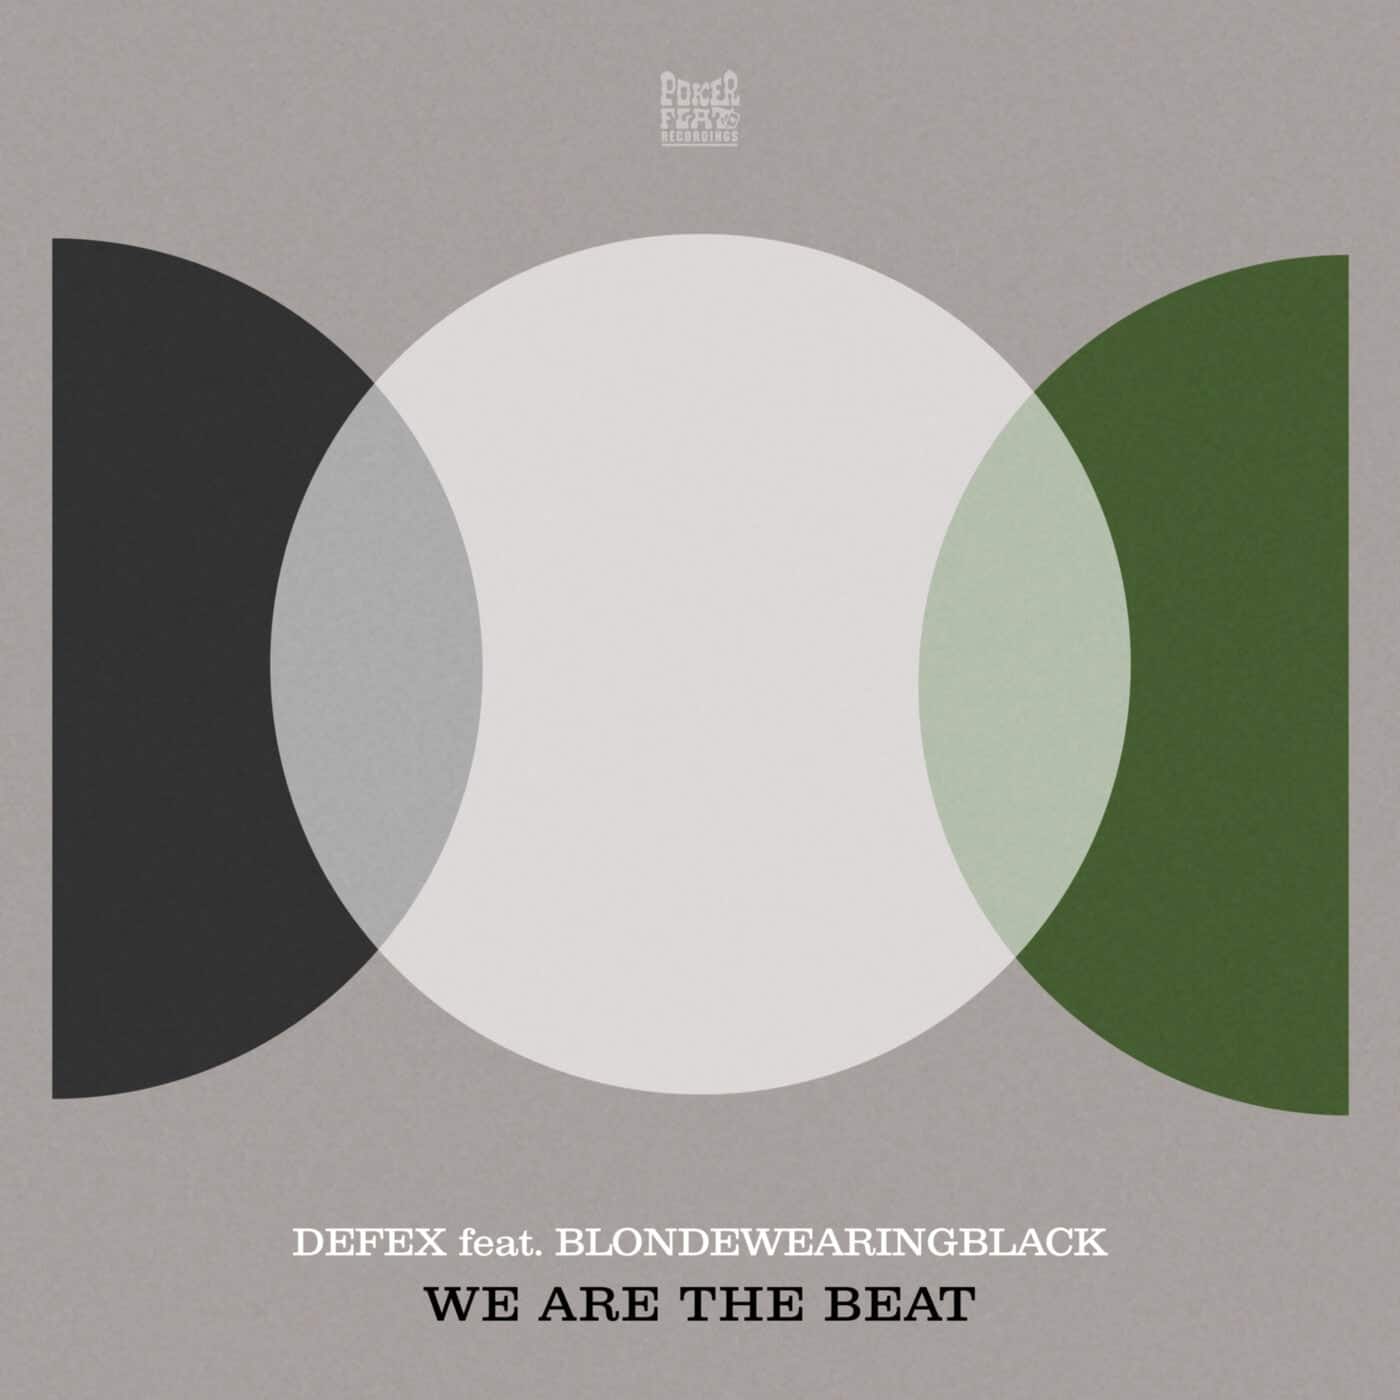 Download Defex, blondewearingblack - We Are The Beat on Electrobuzz